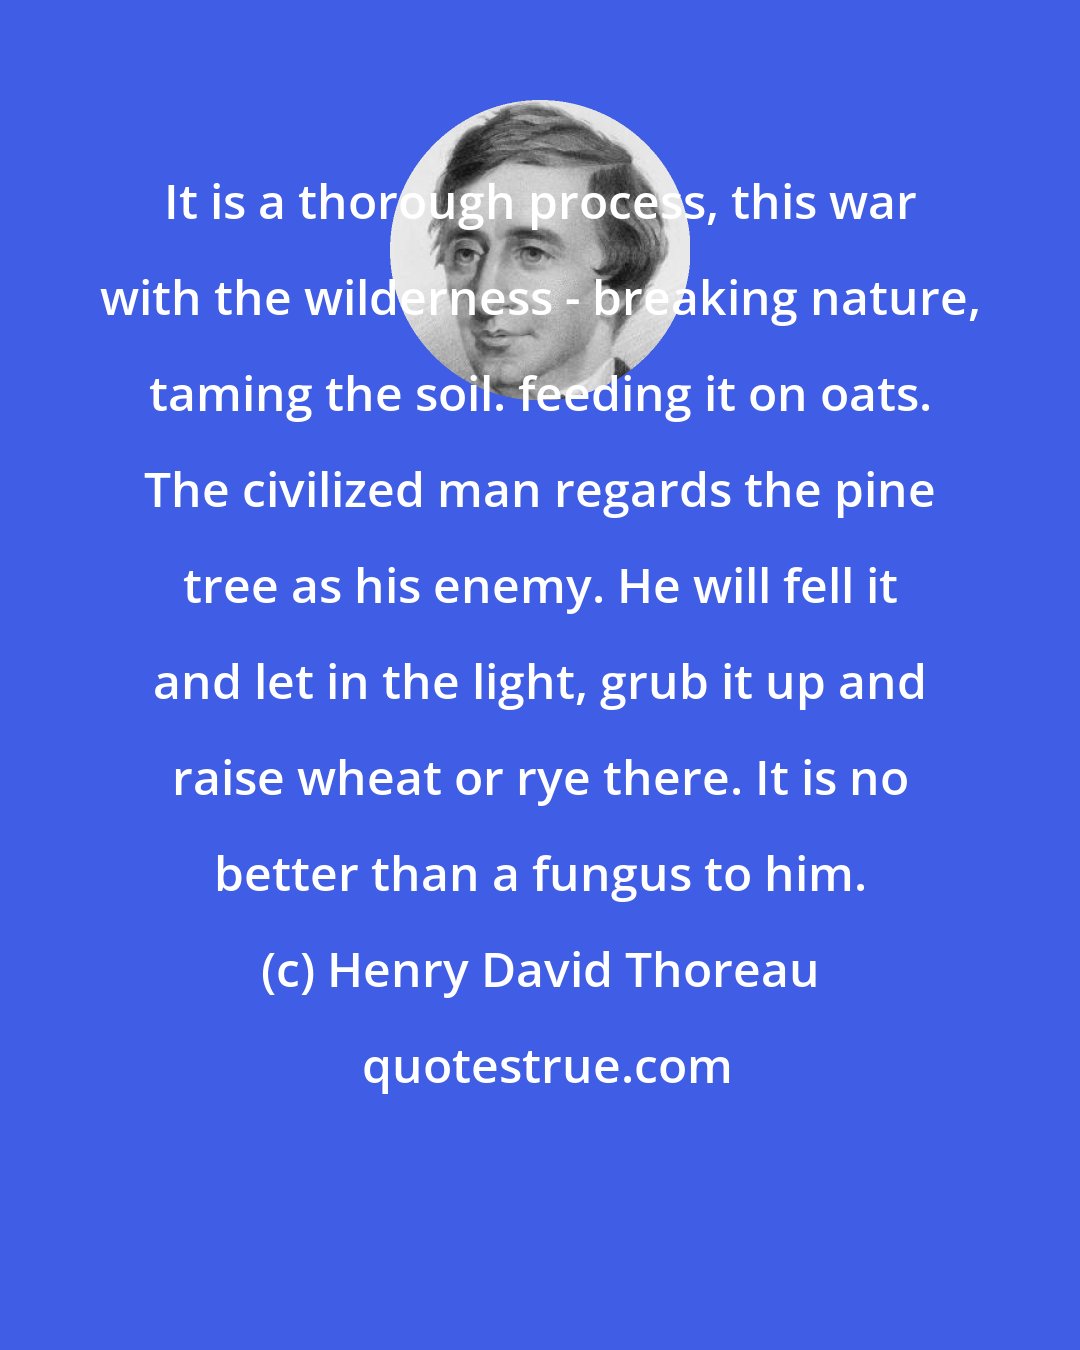 Henry David Thoreau: It is a thorough process, this war with the wilderness - breaking nature, taming the soil. feeding it on oats. The civilized man regards the pine tree as his enemy. He will fell it and let in the light, grub it up and raise wheat or rye there. It is no better than a fungus to him.